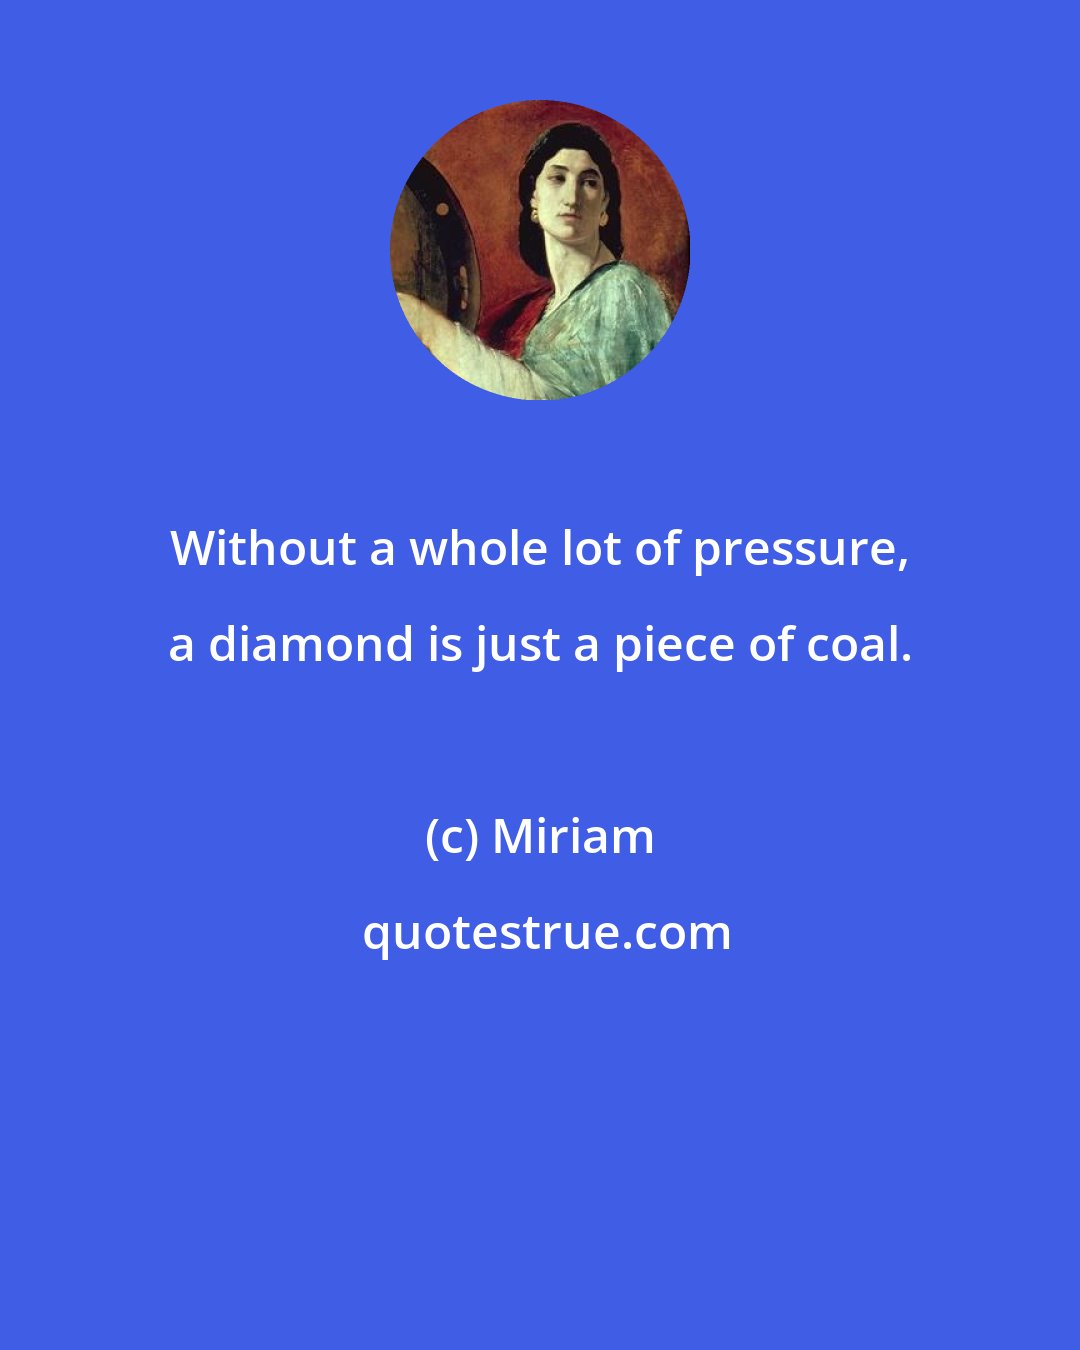 Miriam: Without a whole lot of pressure, a diamond is just a piece of coal.